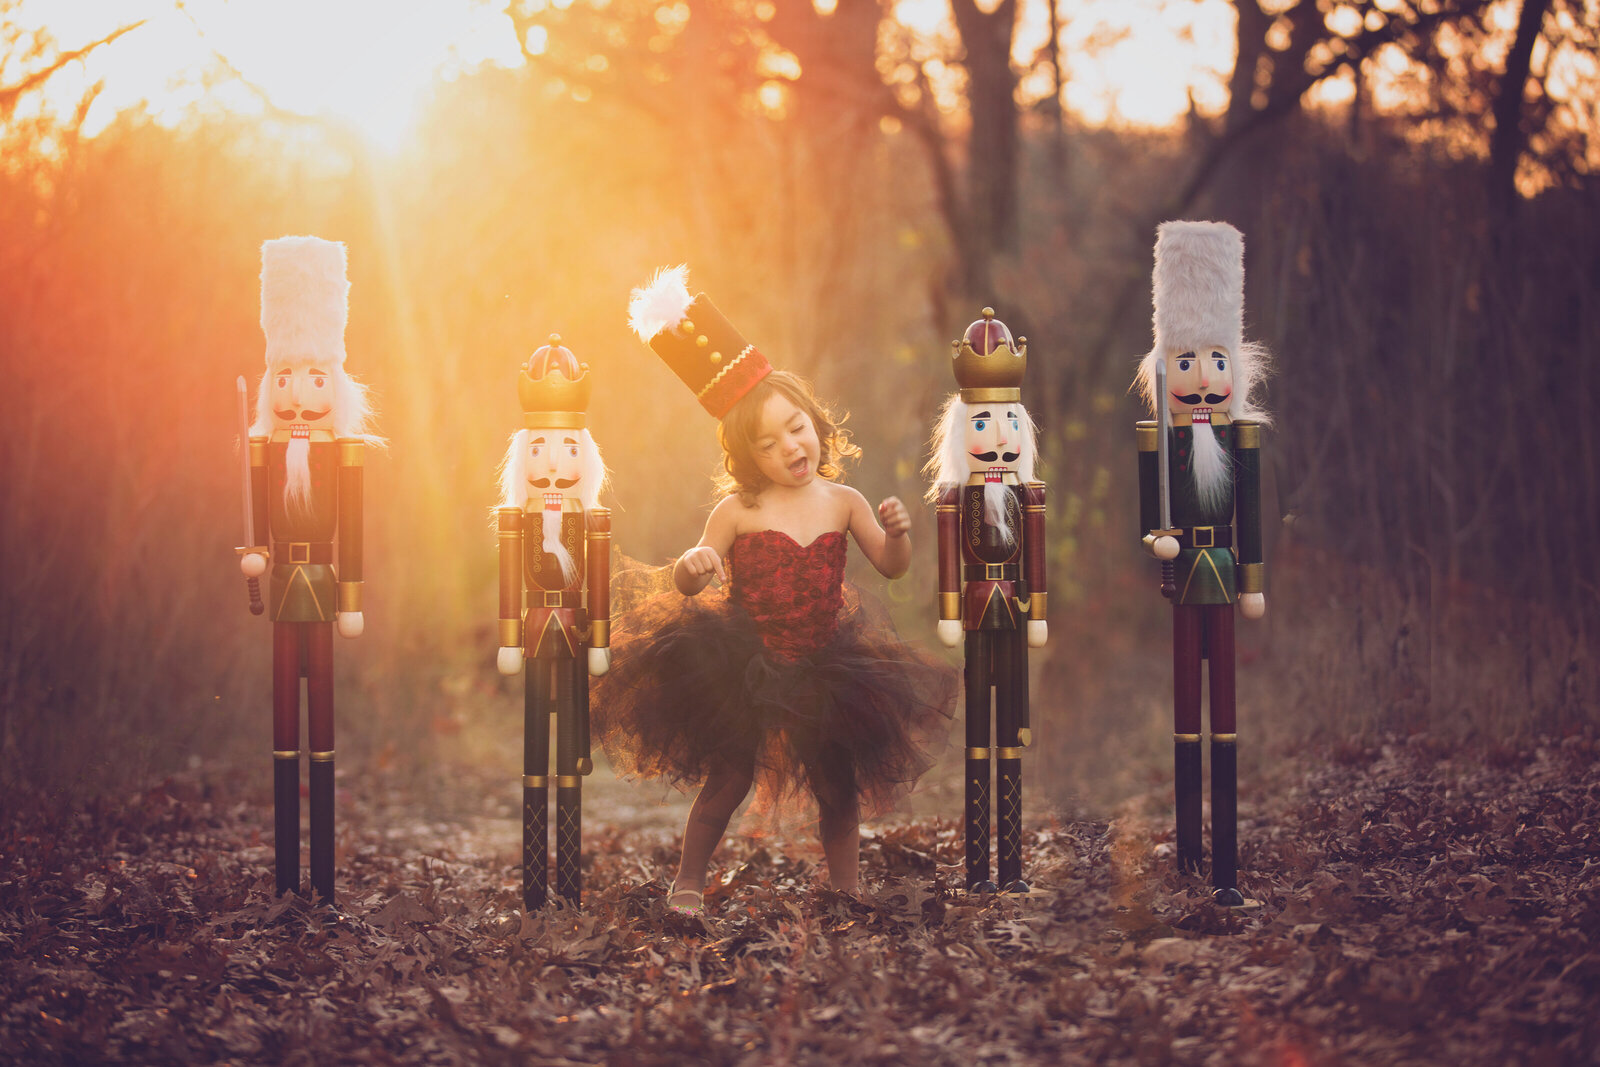 Toddler dancing with Christmas nutcrackers, a Dallas Photoshoot